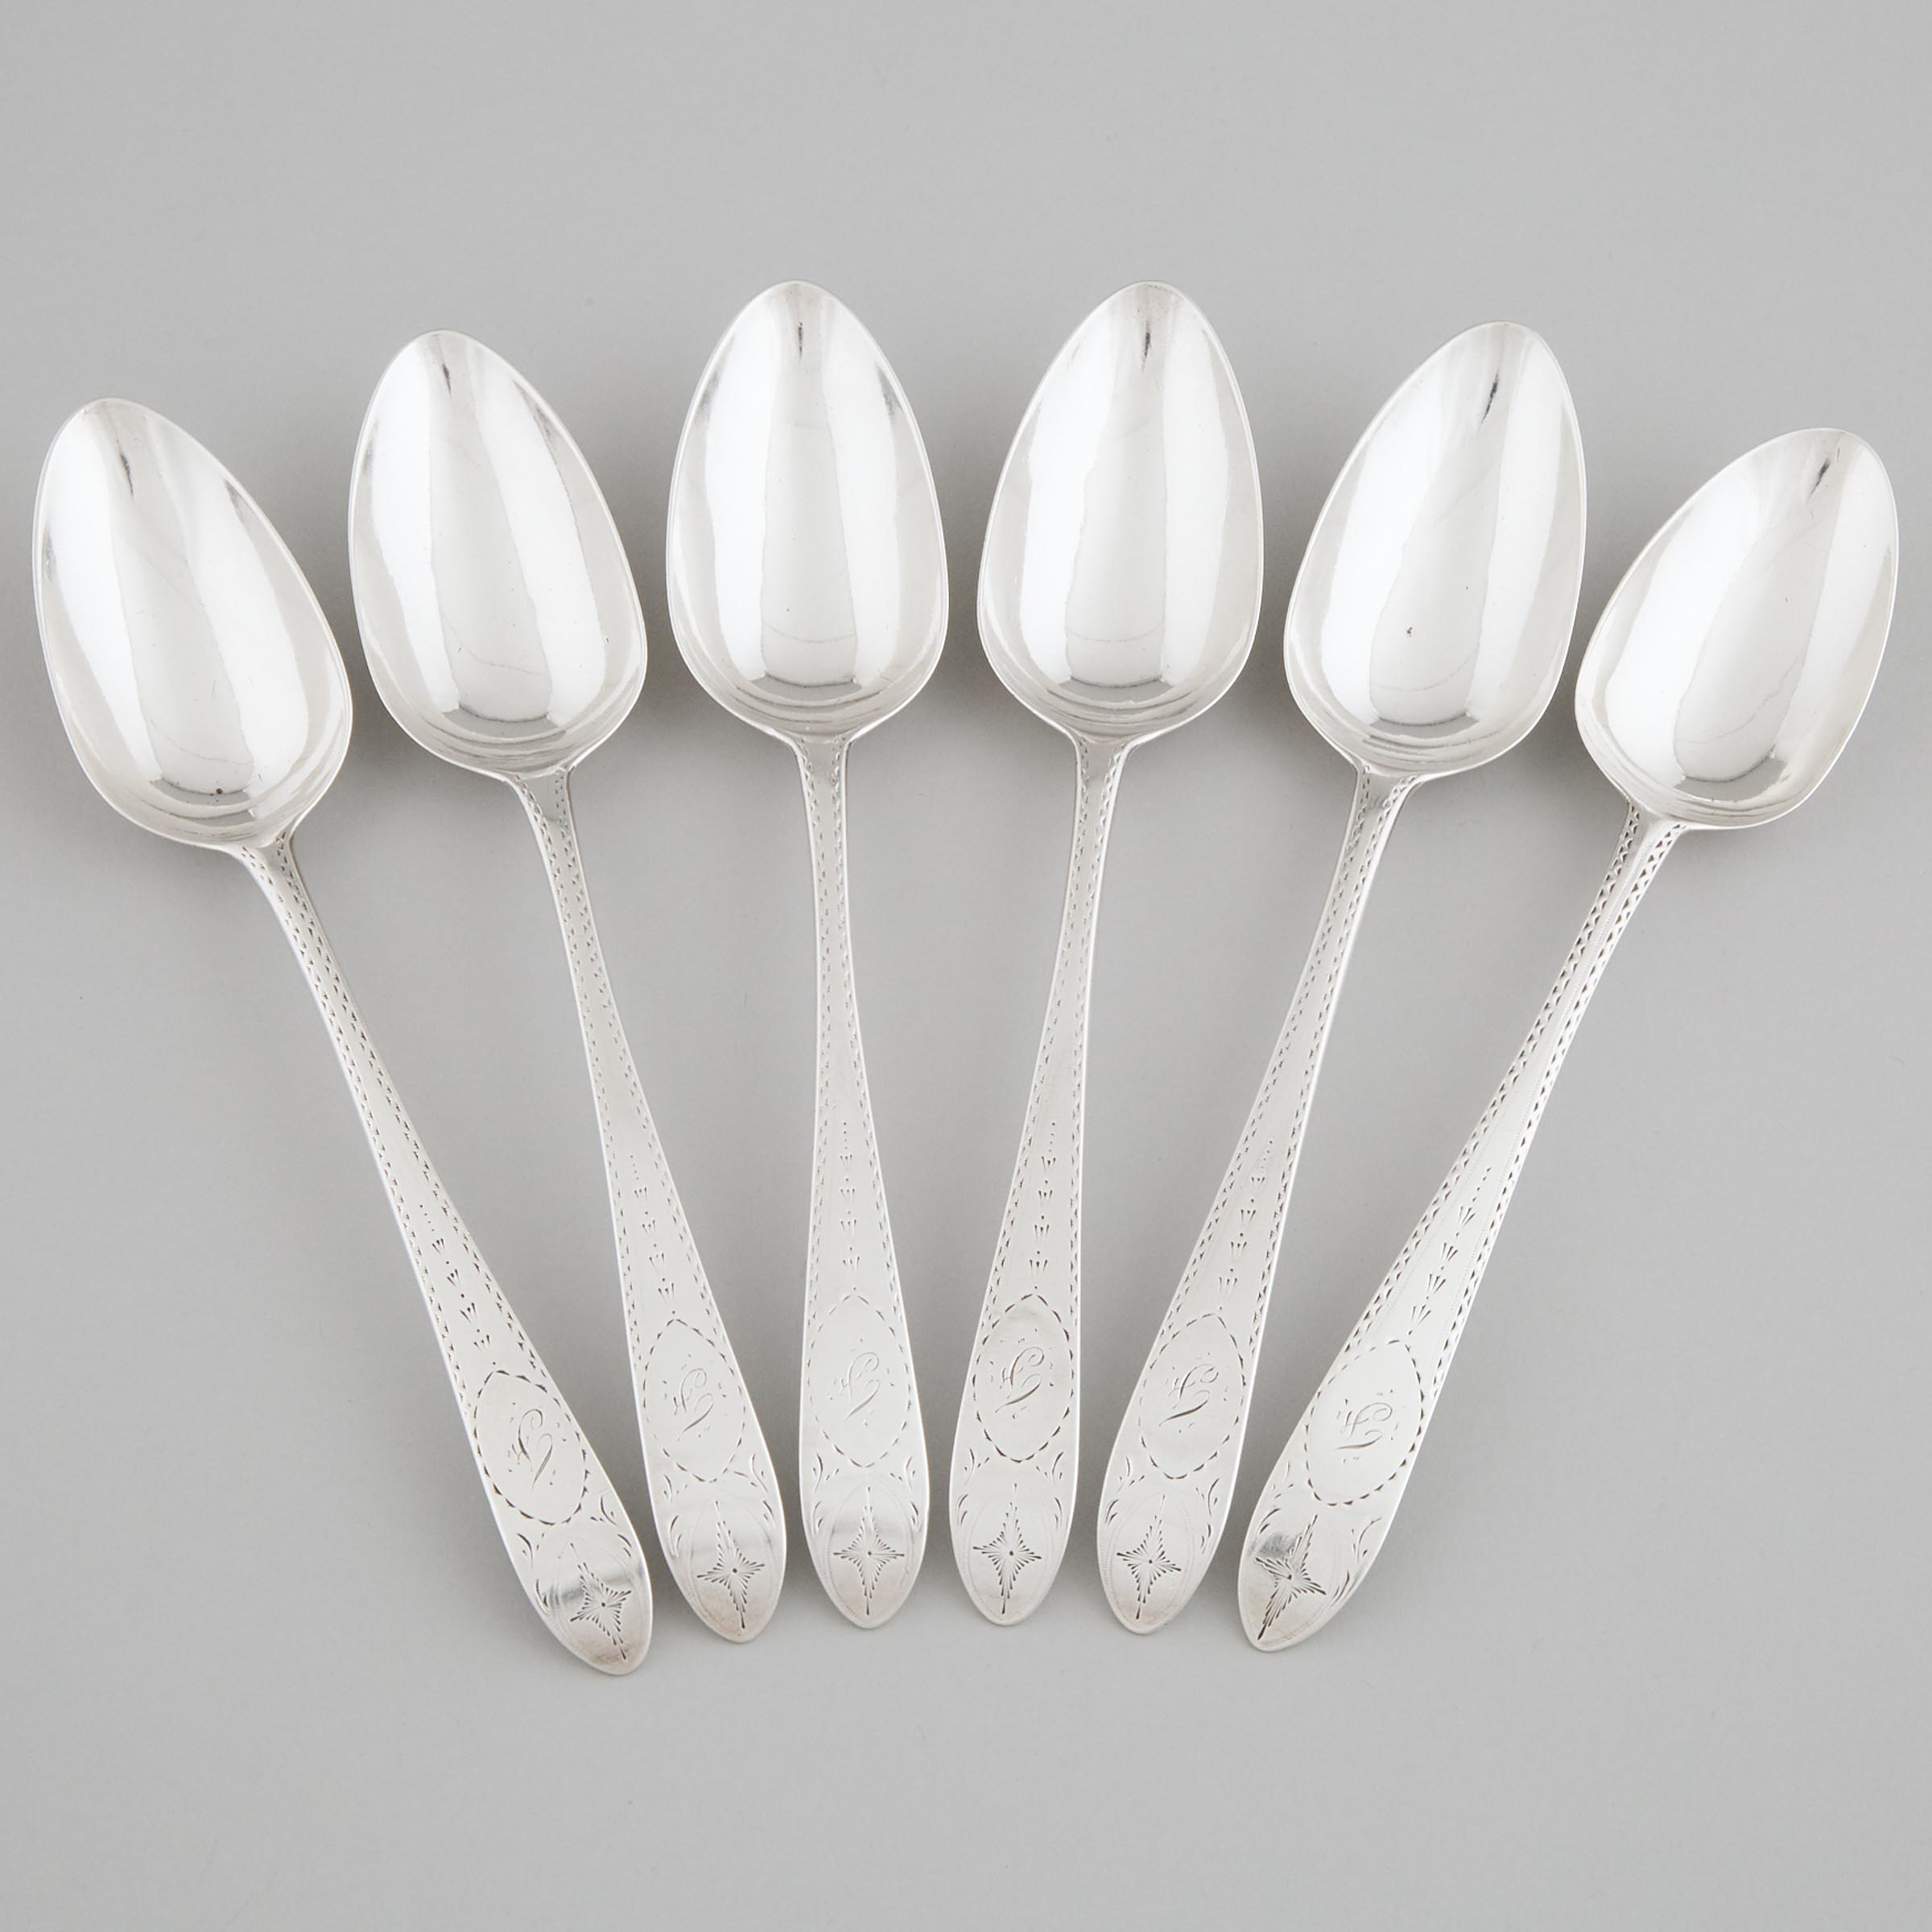 Six George III Irish Silver Bright-Cut Table Spoons, John Dalrymple, Dublin, 1792 (5), and another